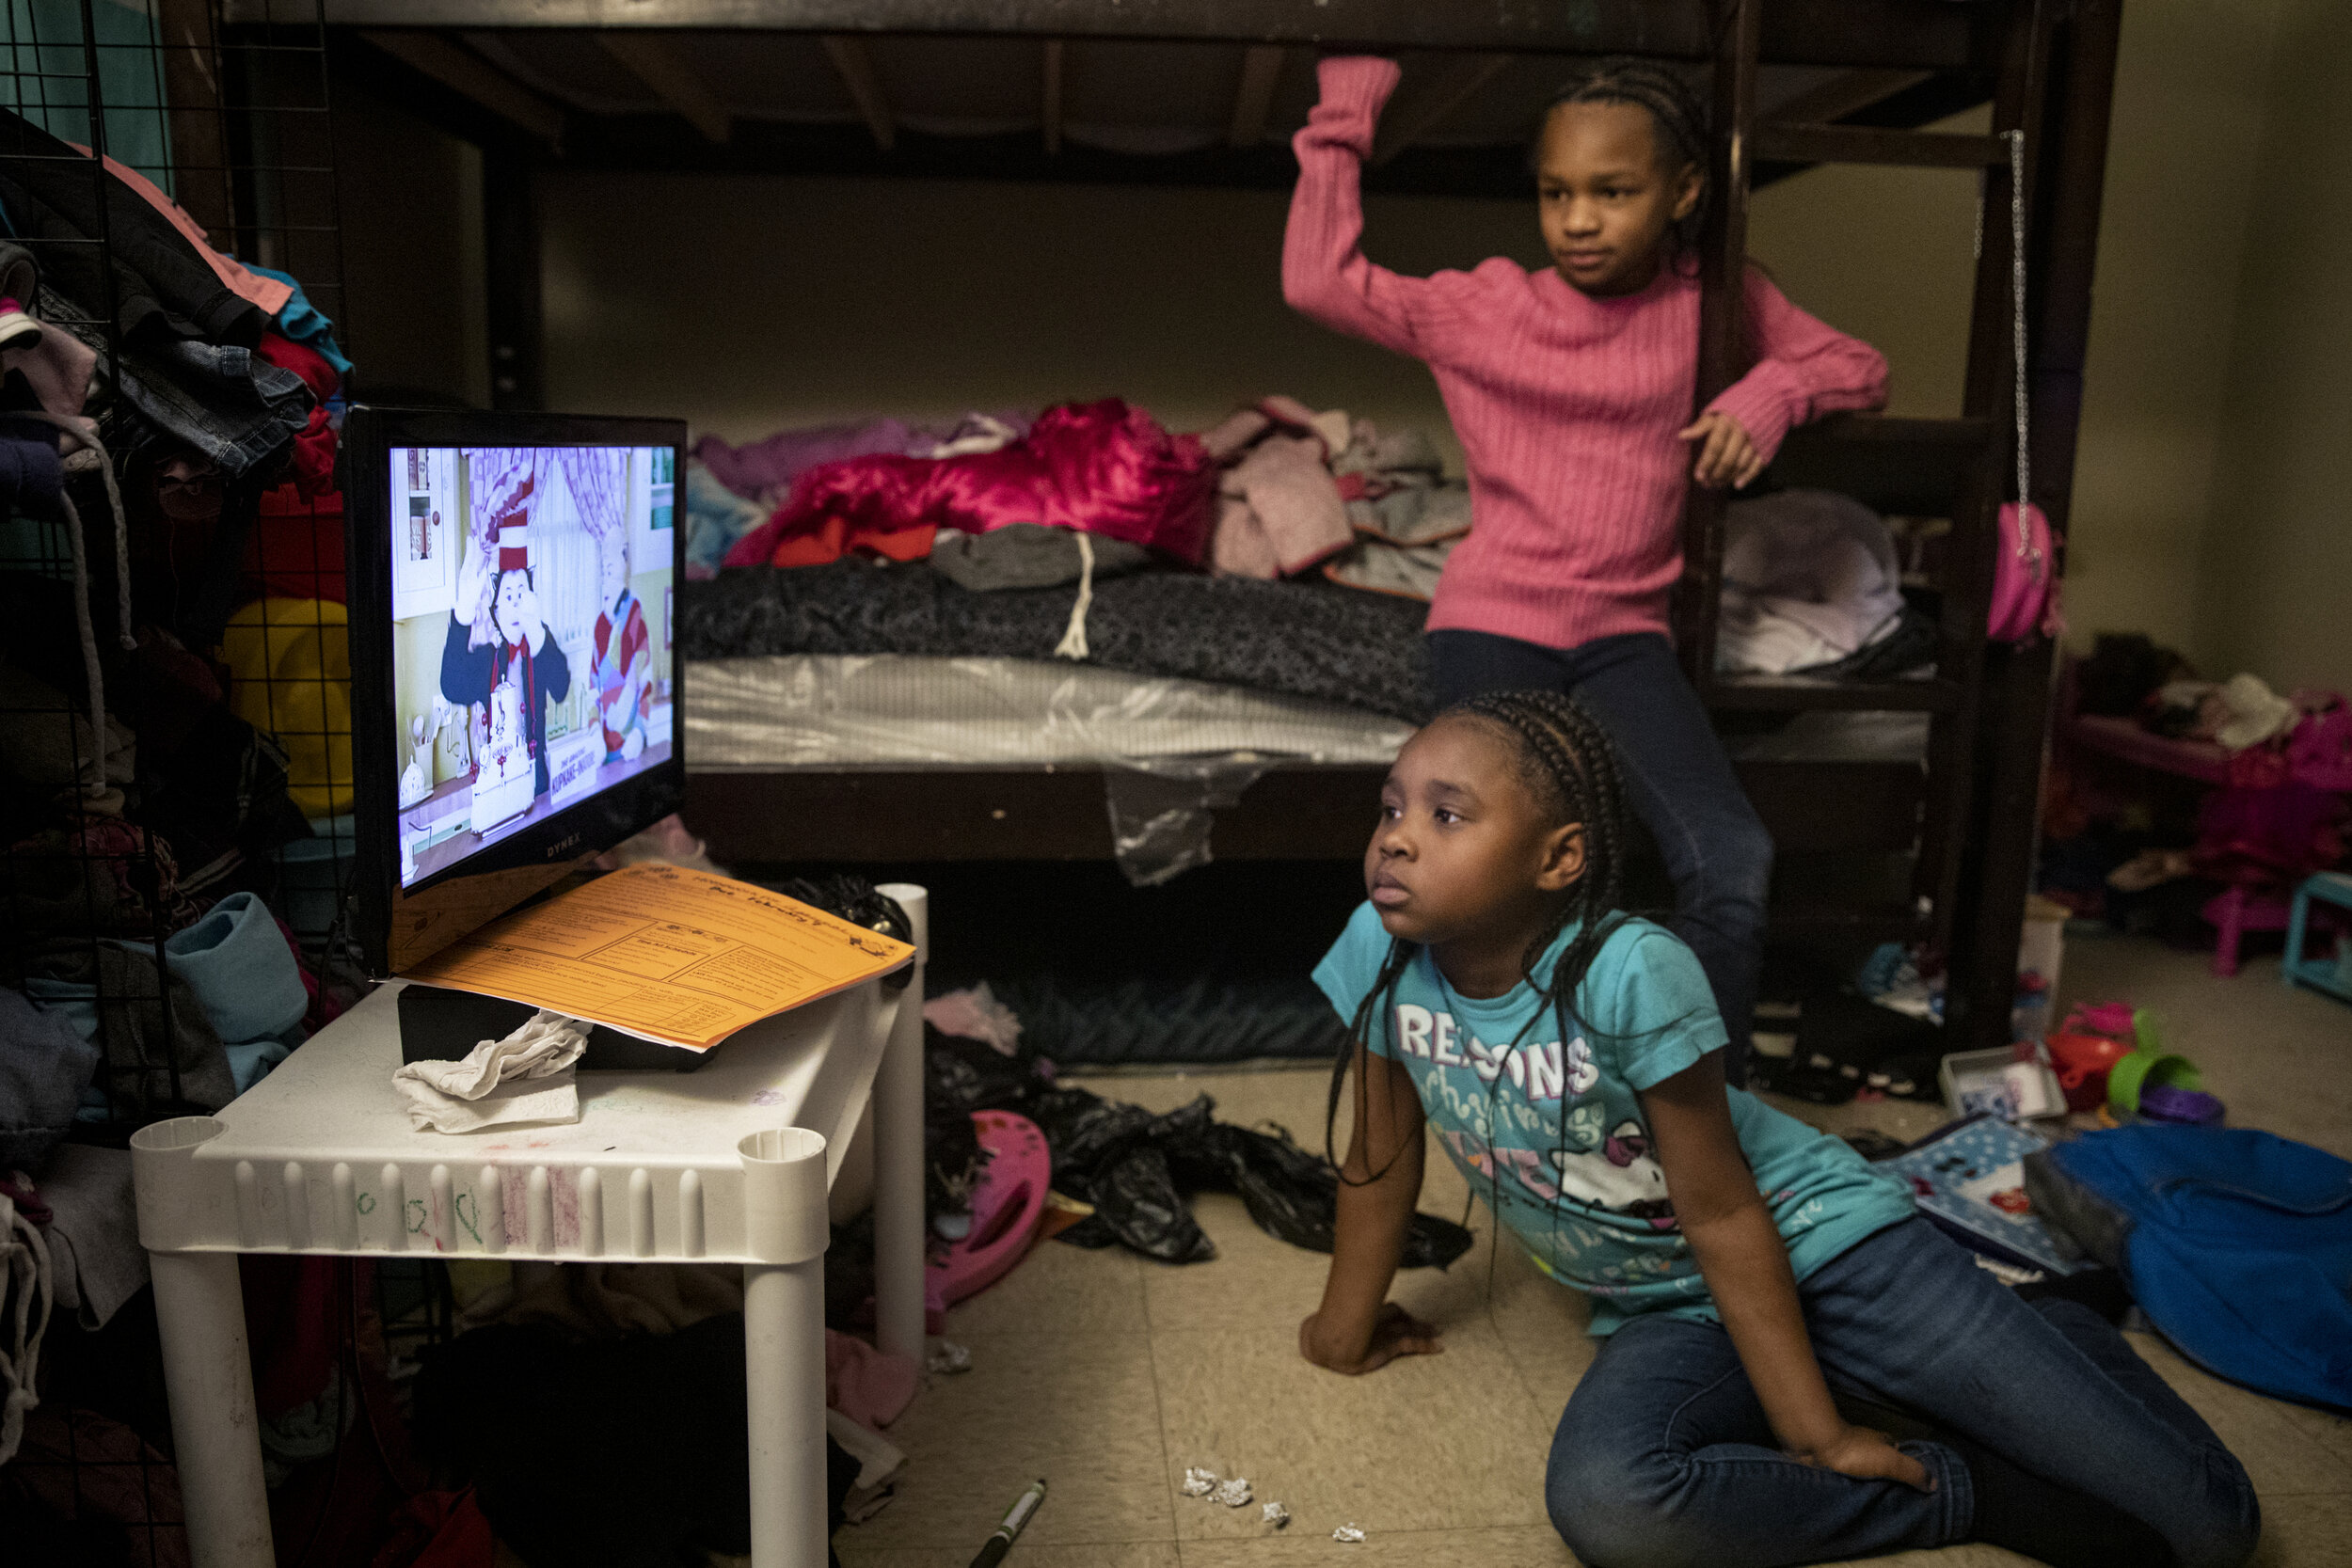  Angelina, 7, and Amariyonna, 9, watch "The Cat in the Hat" in their shared bedroom after finishing their homework. 